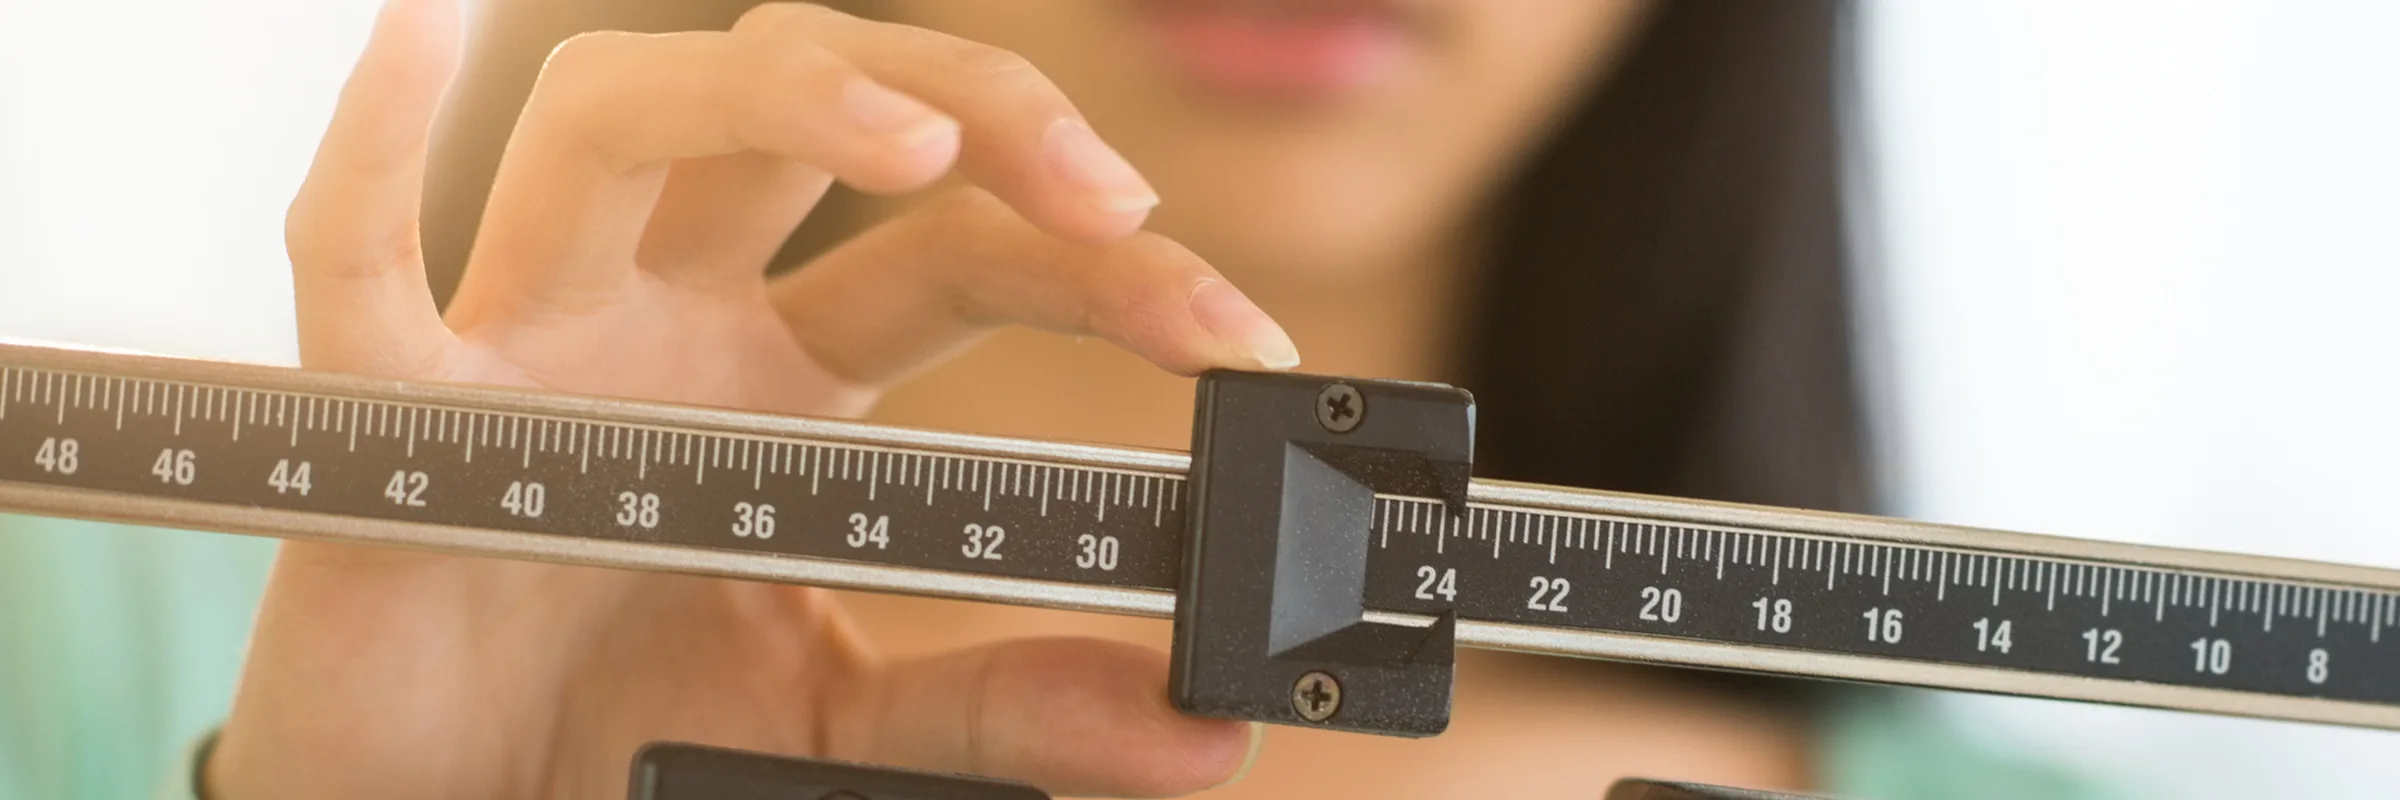 a sliding scale is shown with someone in soft focus adjusting the weight slider.